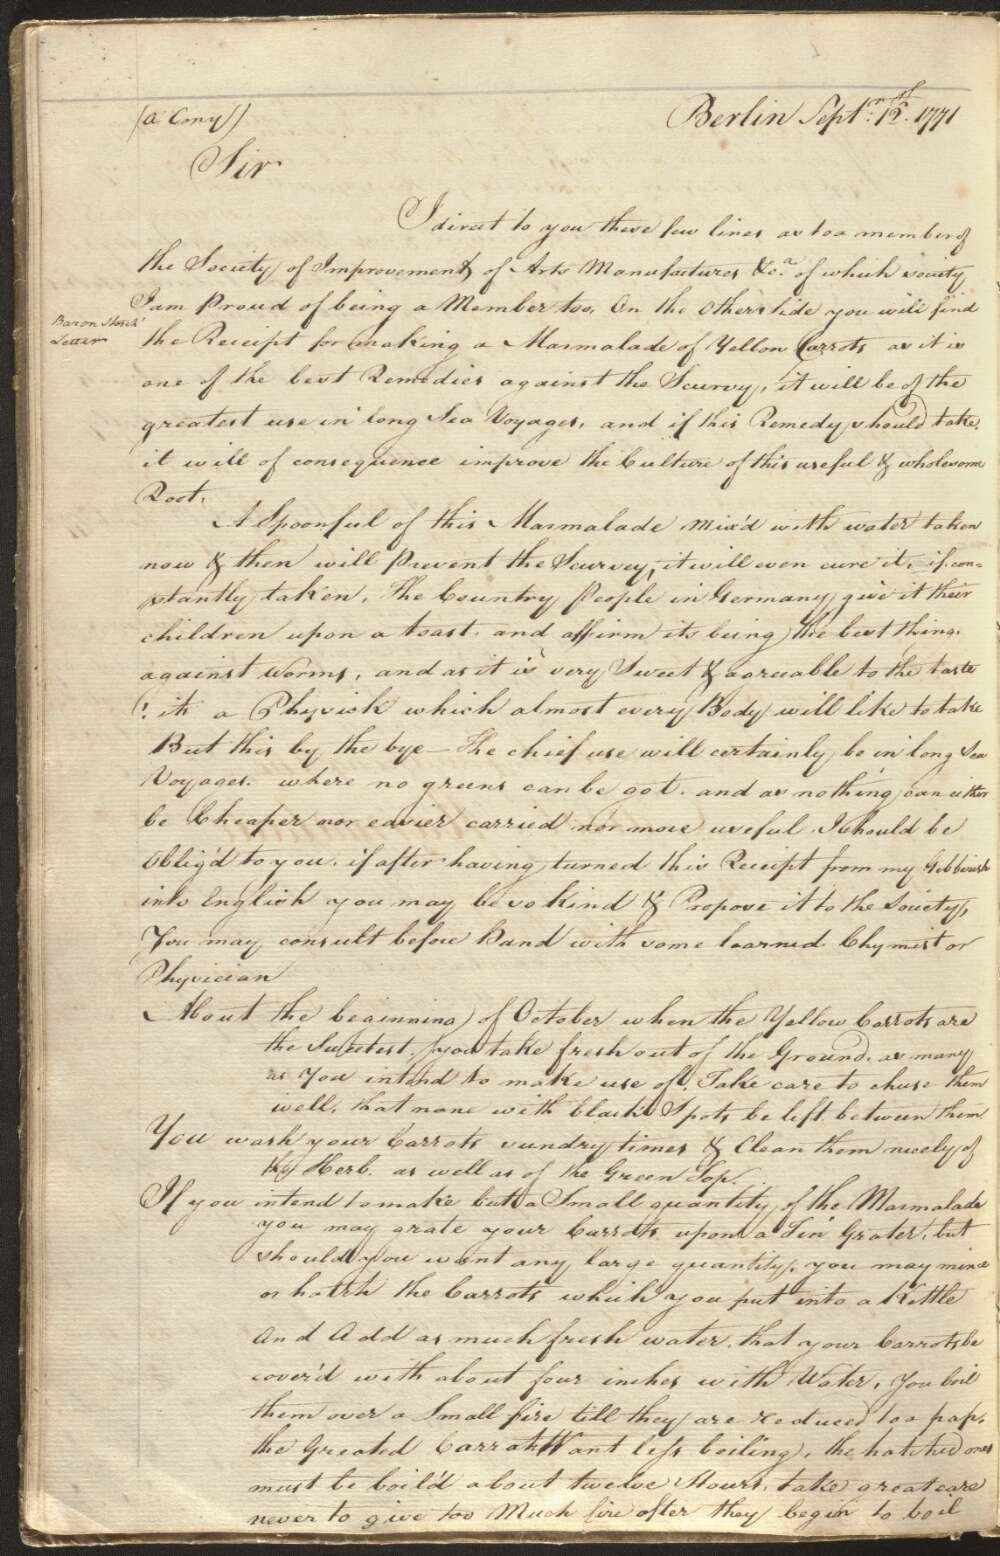 A handwritten letter from 1771 in ink on yellowed paper containing a recipe for carrot marmalade